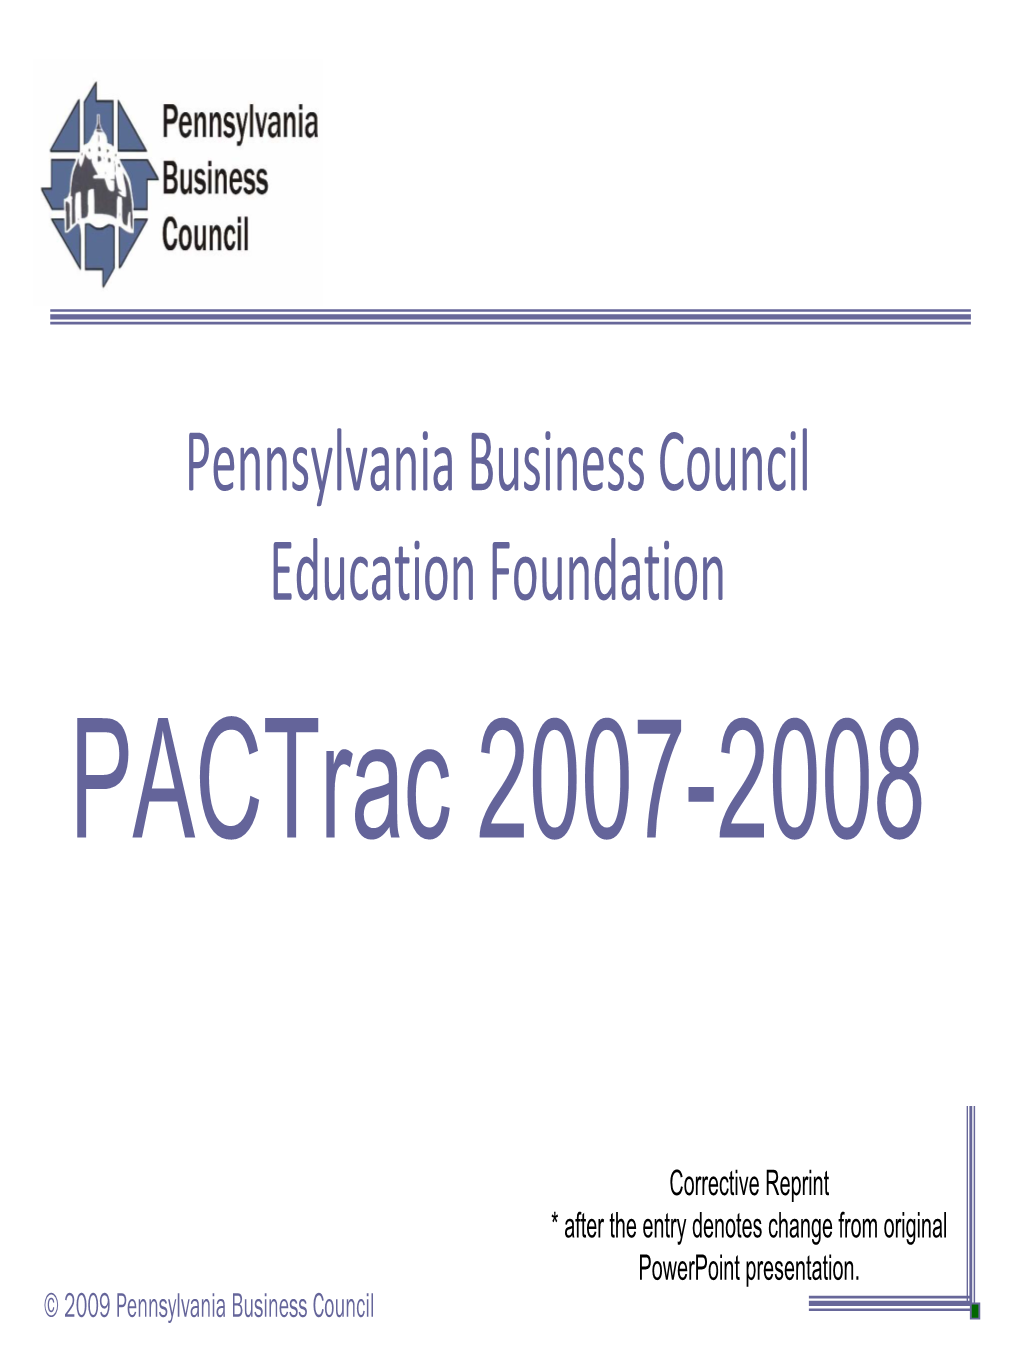 Pactrac 2007-2008